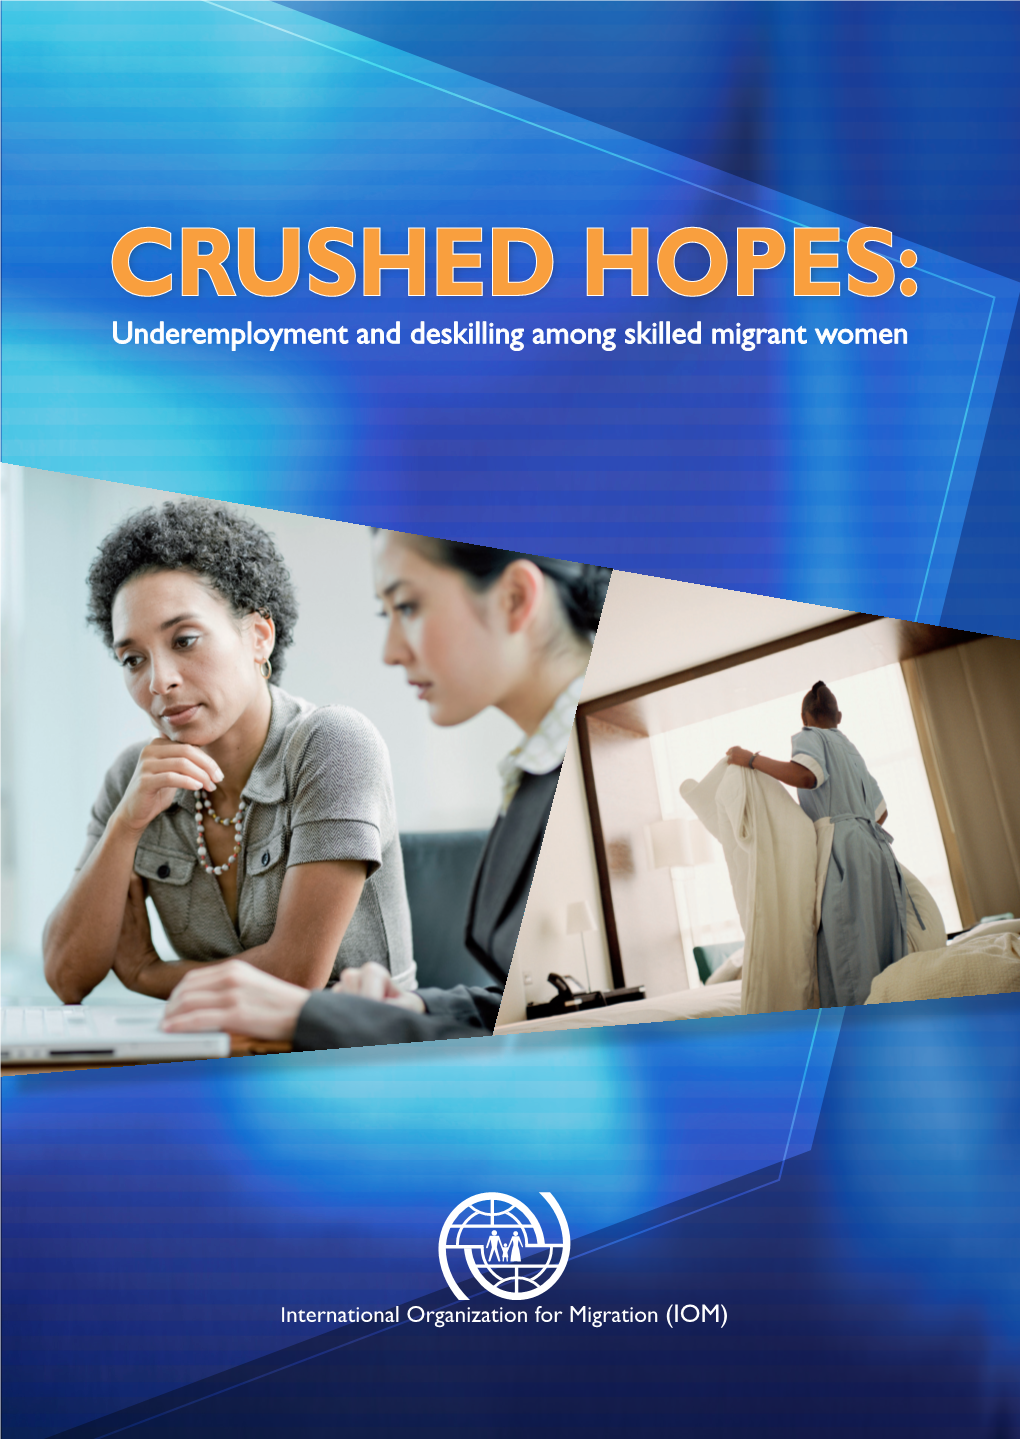 CRUSHED HOPES: Underemployment and Deskilling Among Skilled Migrant Women